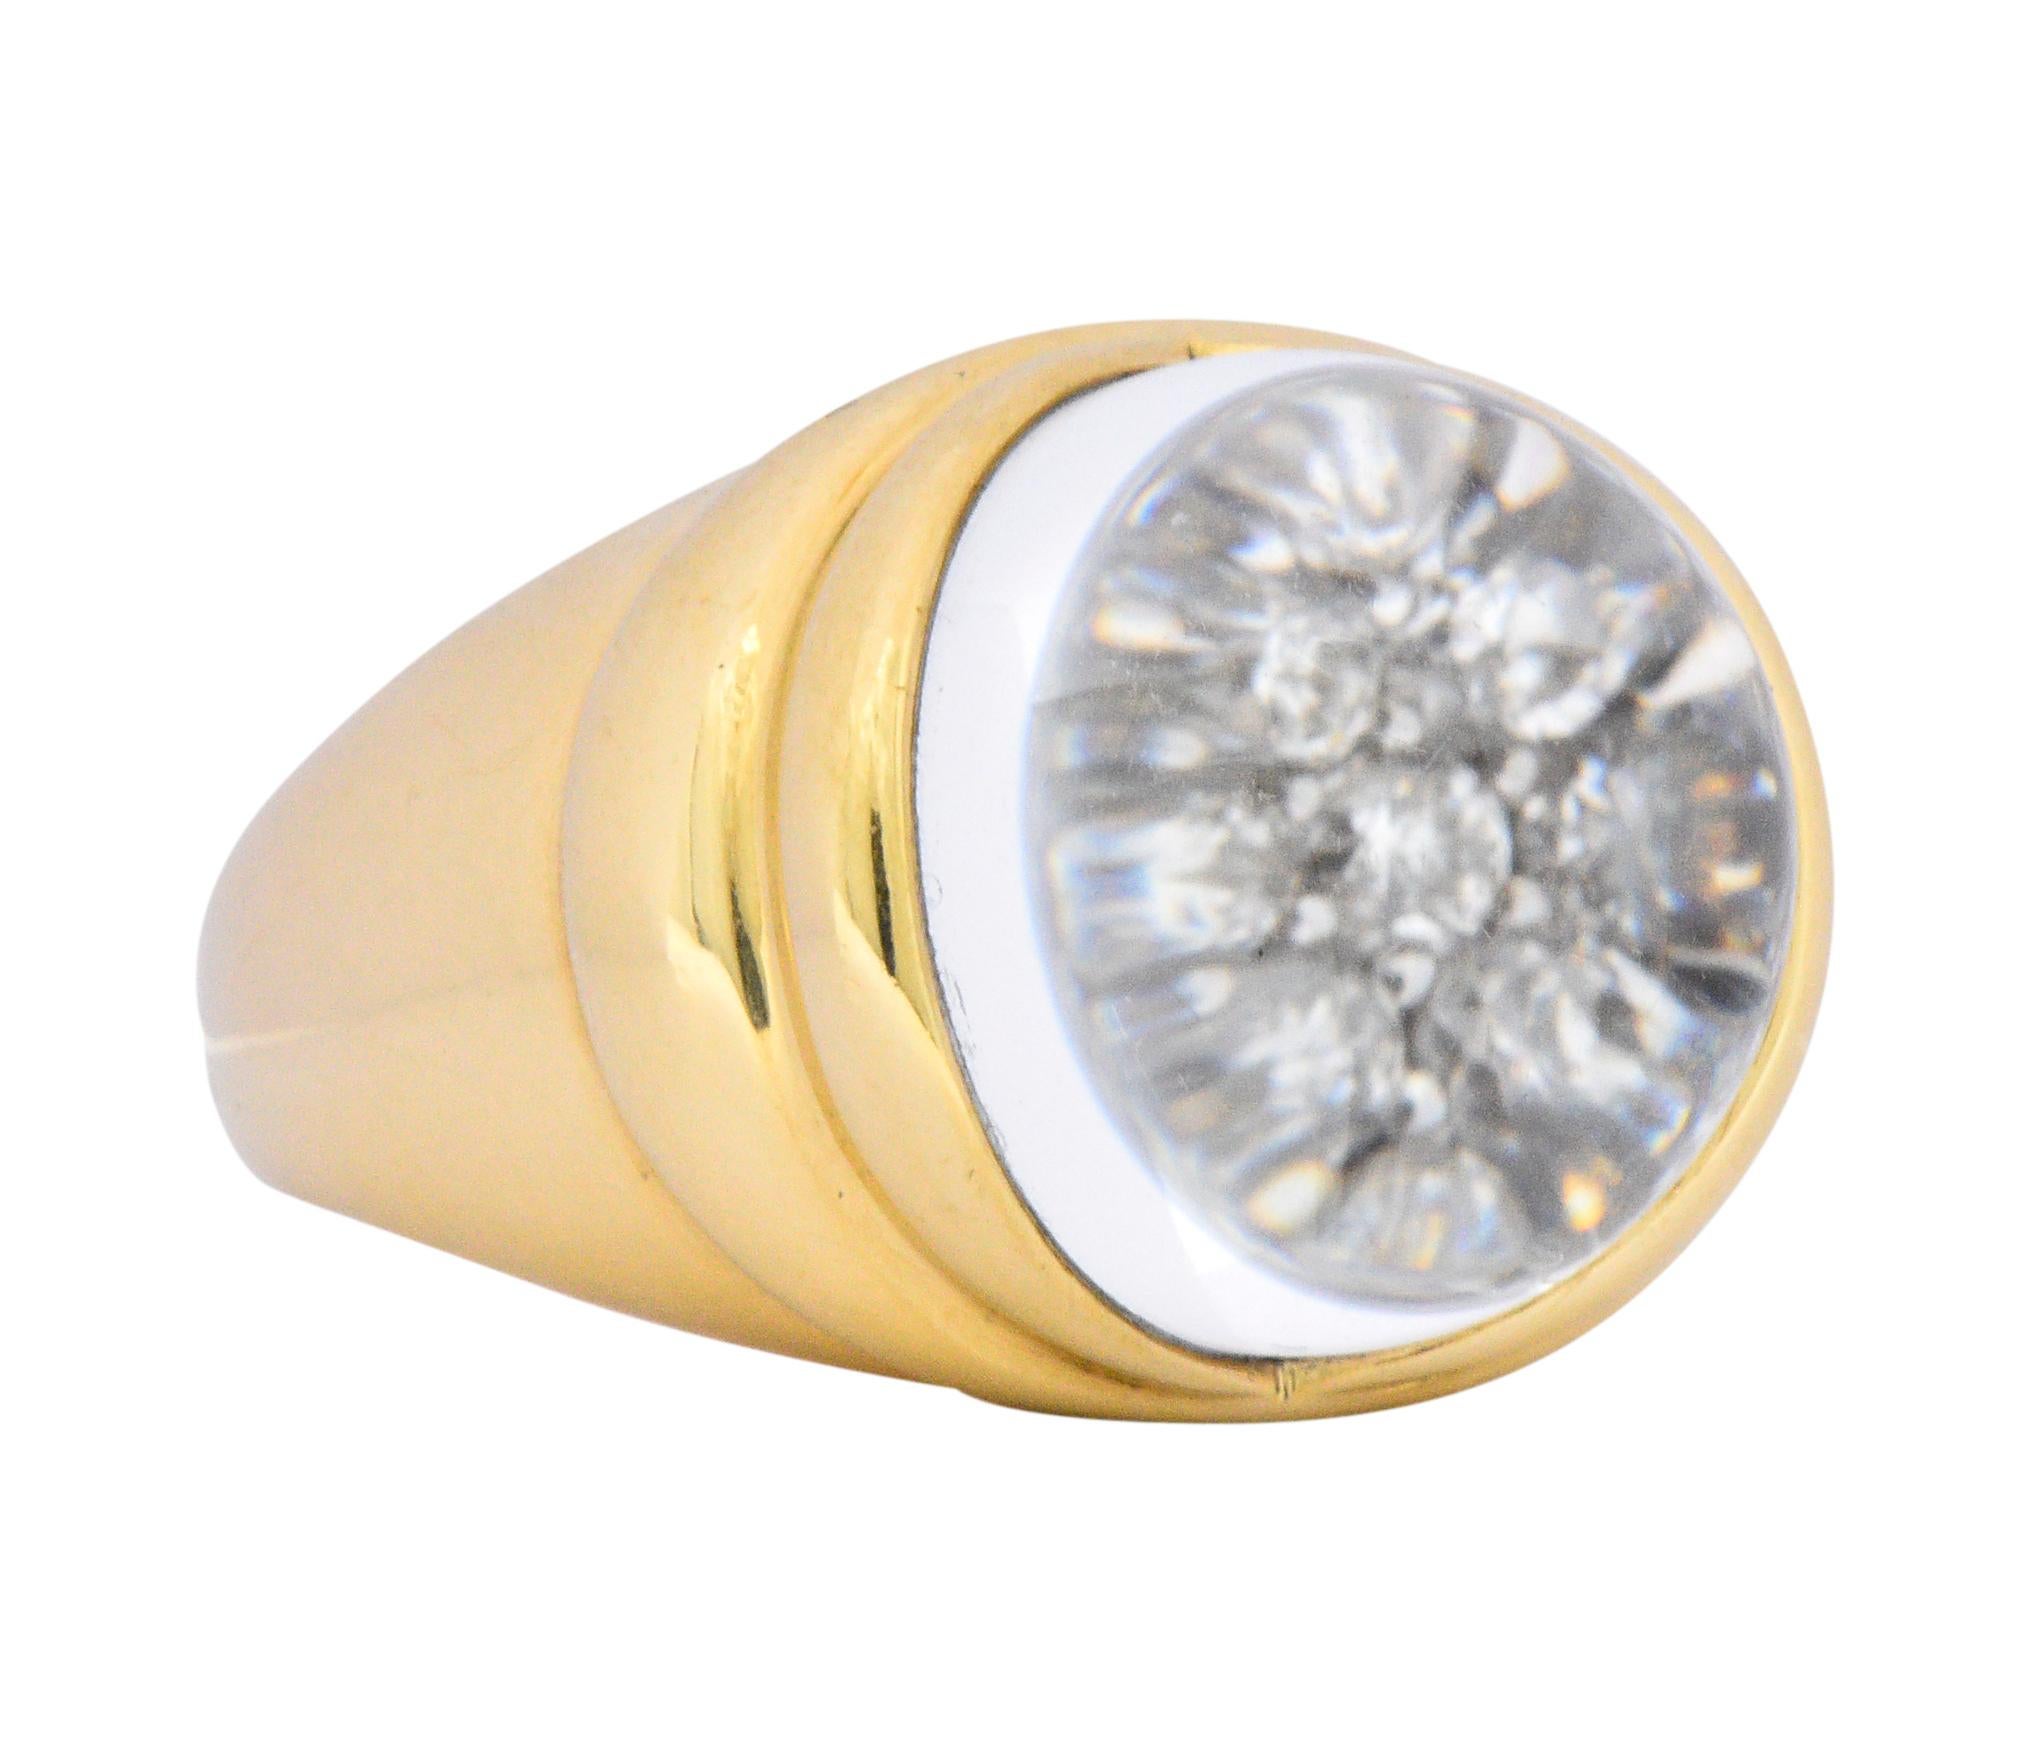 Featuring a rock crystal sphere measuring approximately 16.0 mm, over pavé set round brilliant cut diamonds

Set in a ribbed high polished gold mounting

The crystal ball magnifies the diamonds, creating the illusion of a larger diamonds

Fully